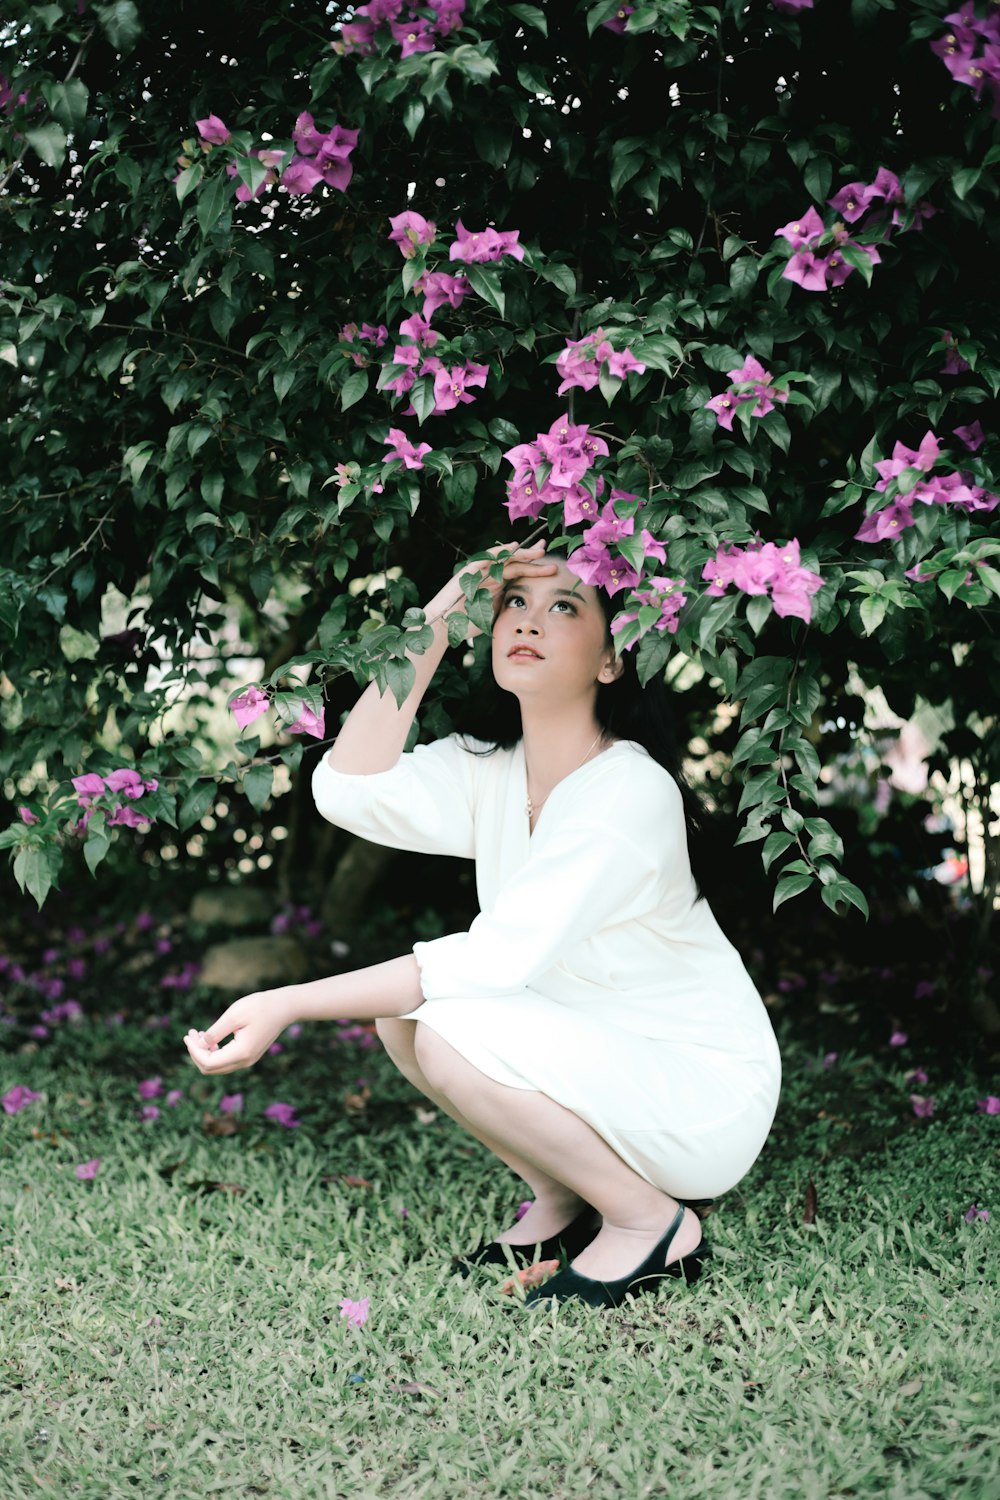 a woman sitting in a grassy area with flowers in the back